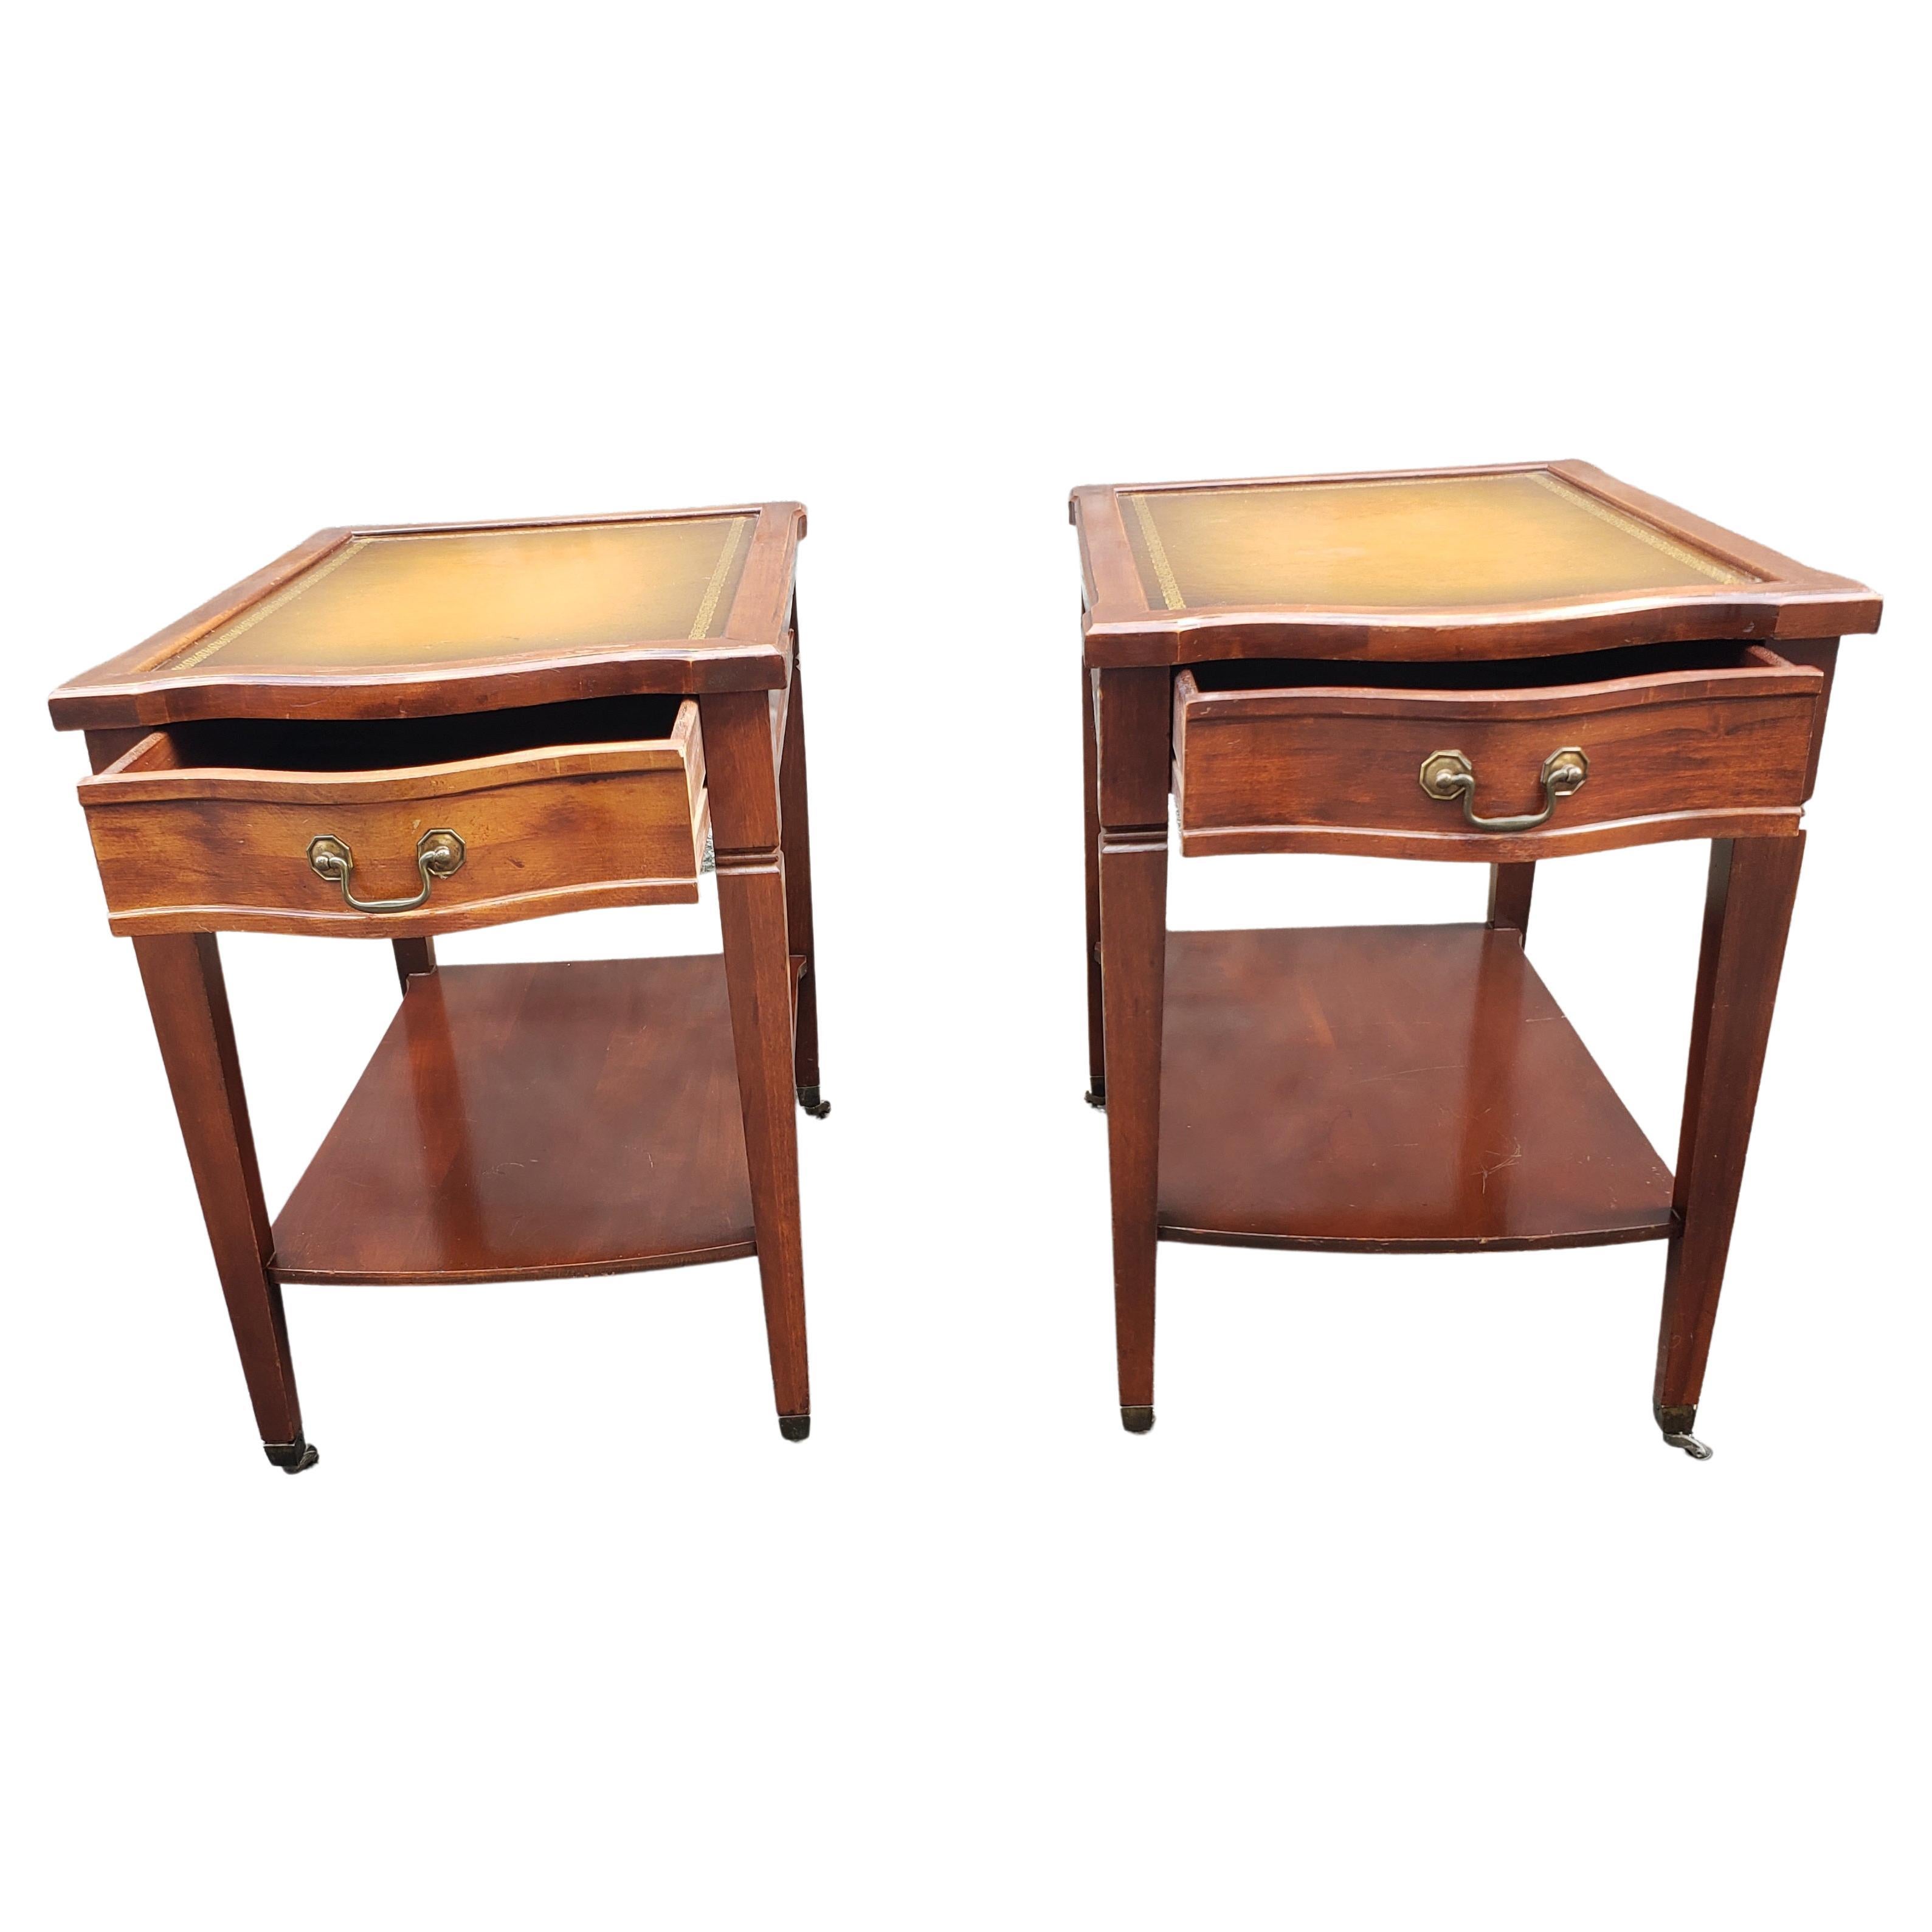 Américain 1940's Mersman Two Tier Mahogany Tooled Leather Stenciled Top Side Tables